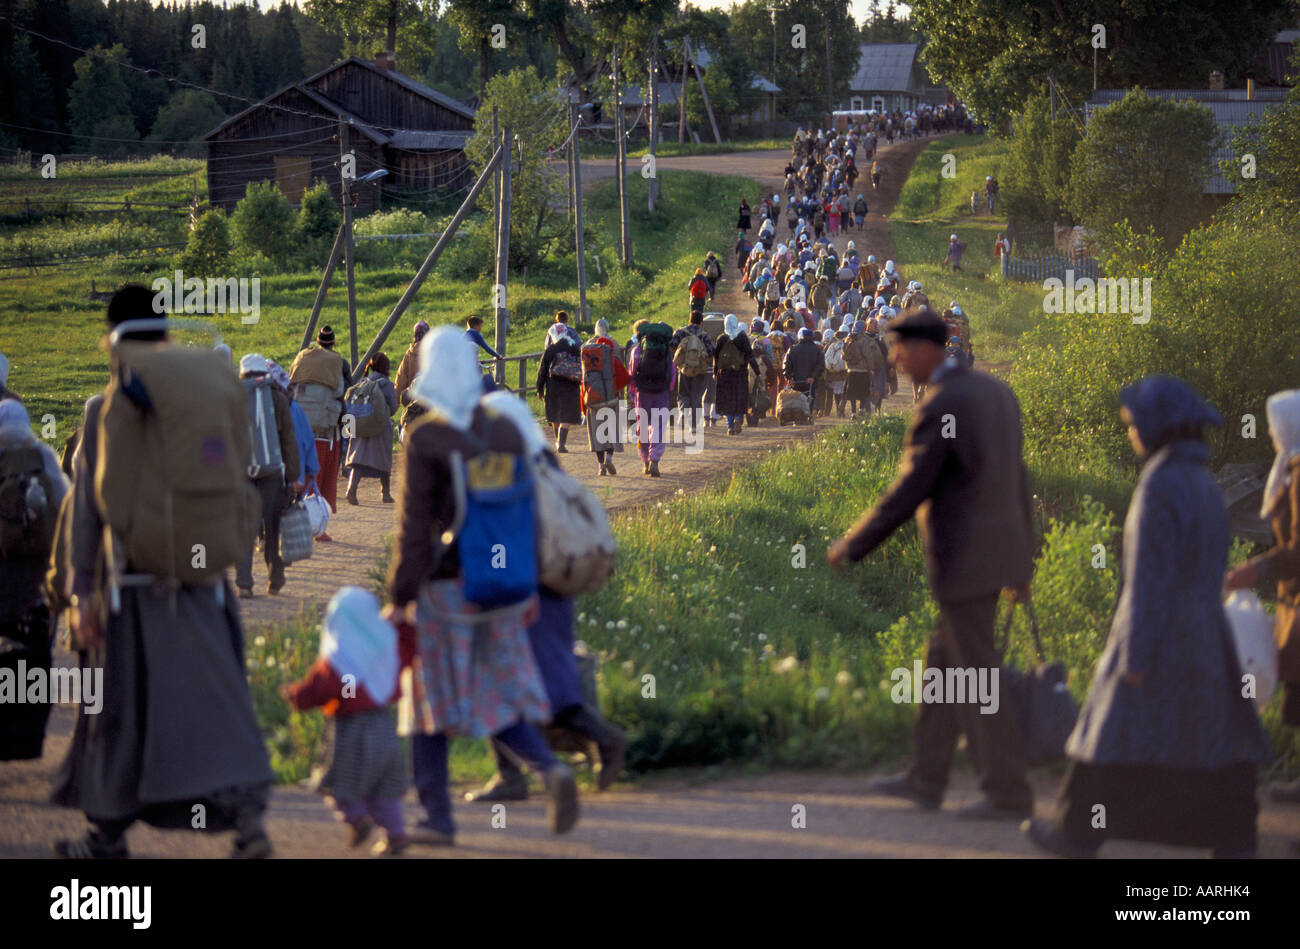 PILGRIMAGE TO VELIKAYA RIVER 95 THE PROCESSION TAKES RUSSIAN ORTHODOX BELIEVERS ACROSS 100 MILES OF RUSSIAN COUNTRYSIDE 1995 Stock Photo